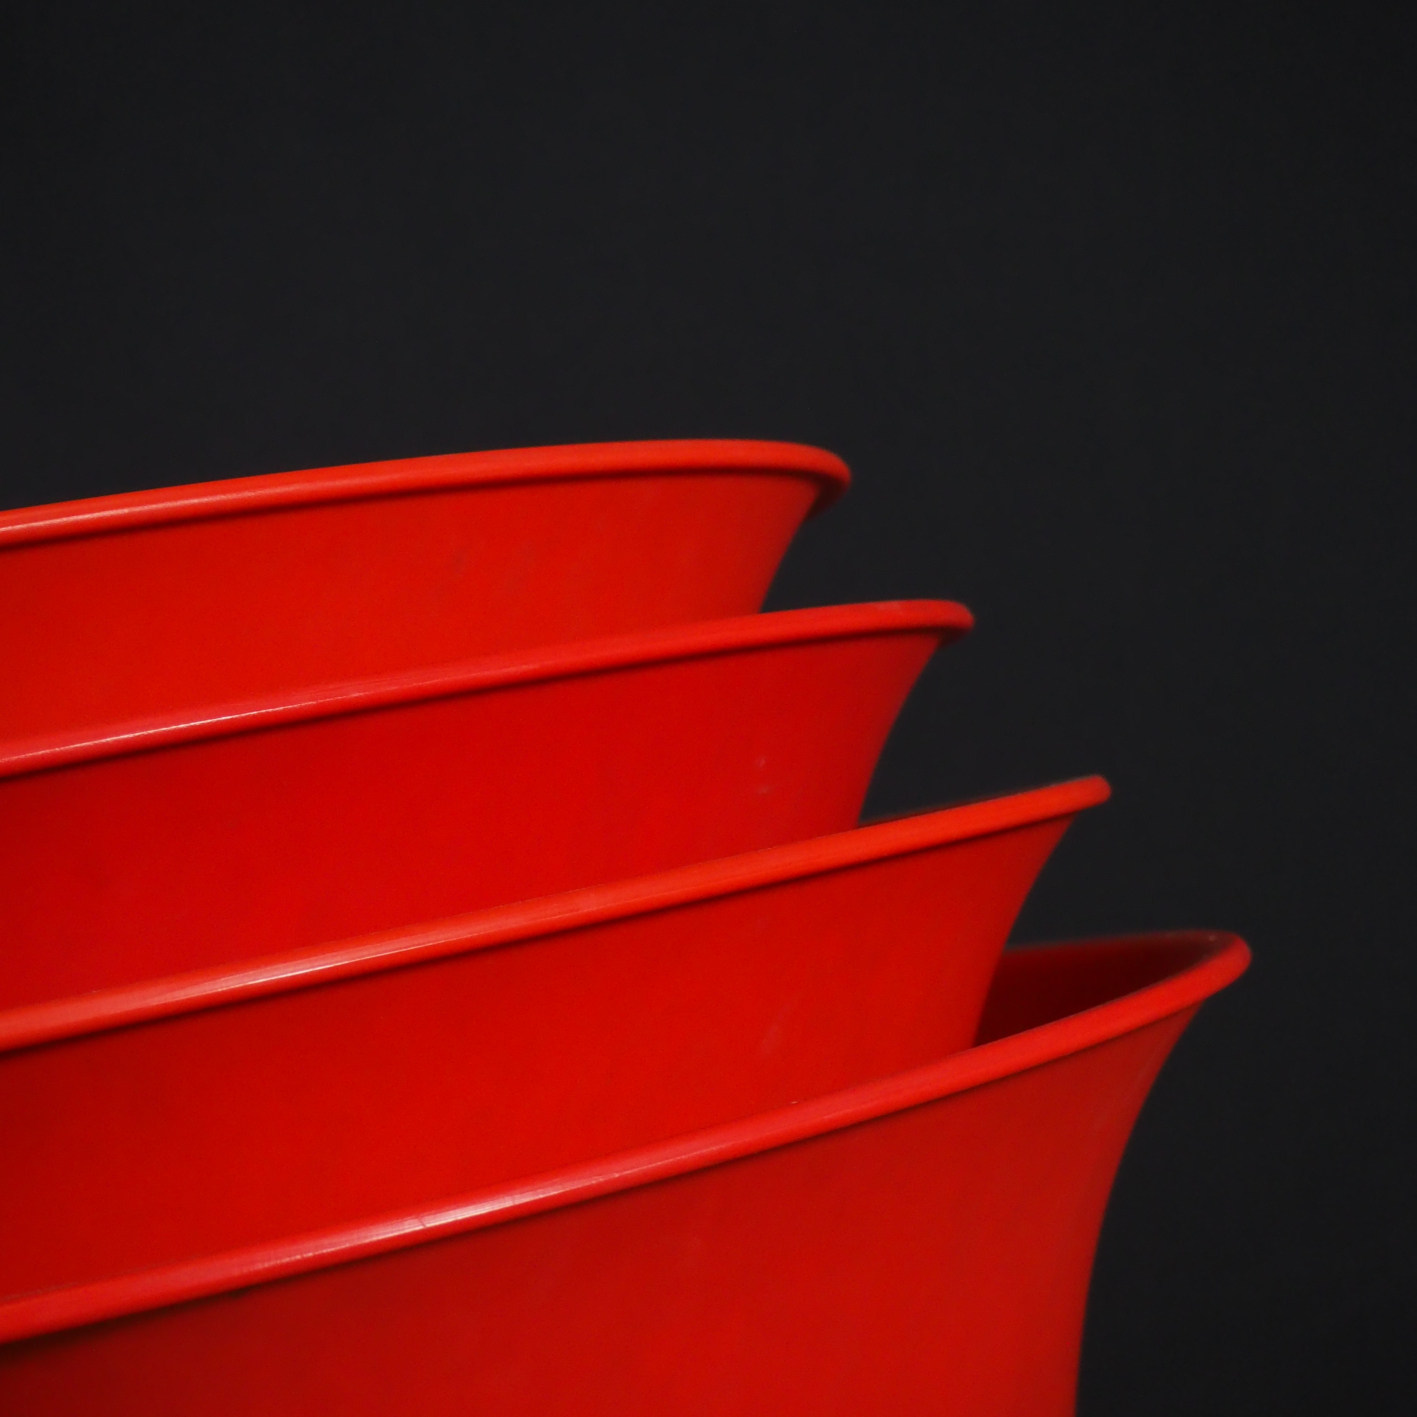 Stackable red chair 'Kicca' by Kastel